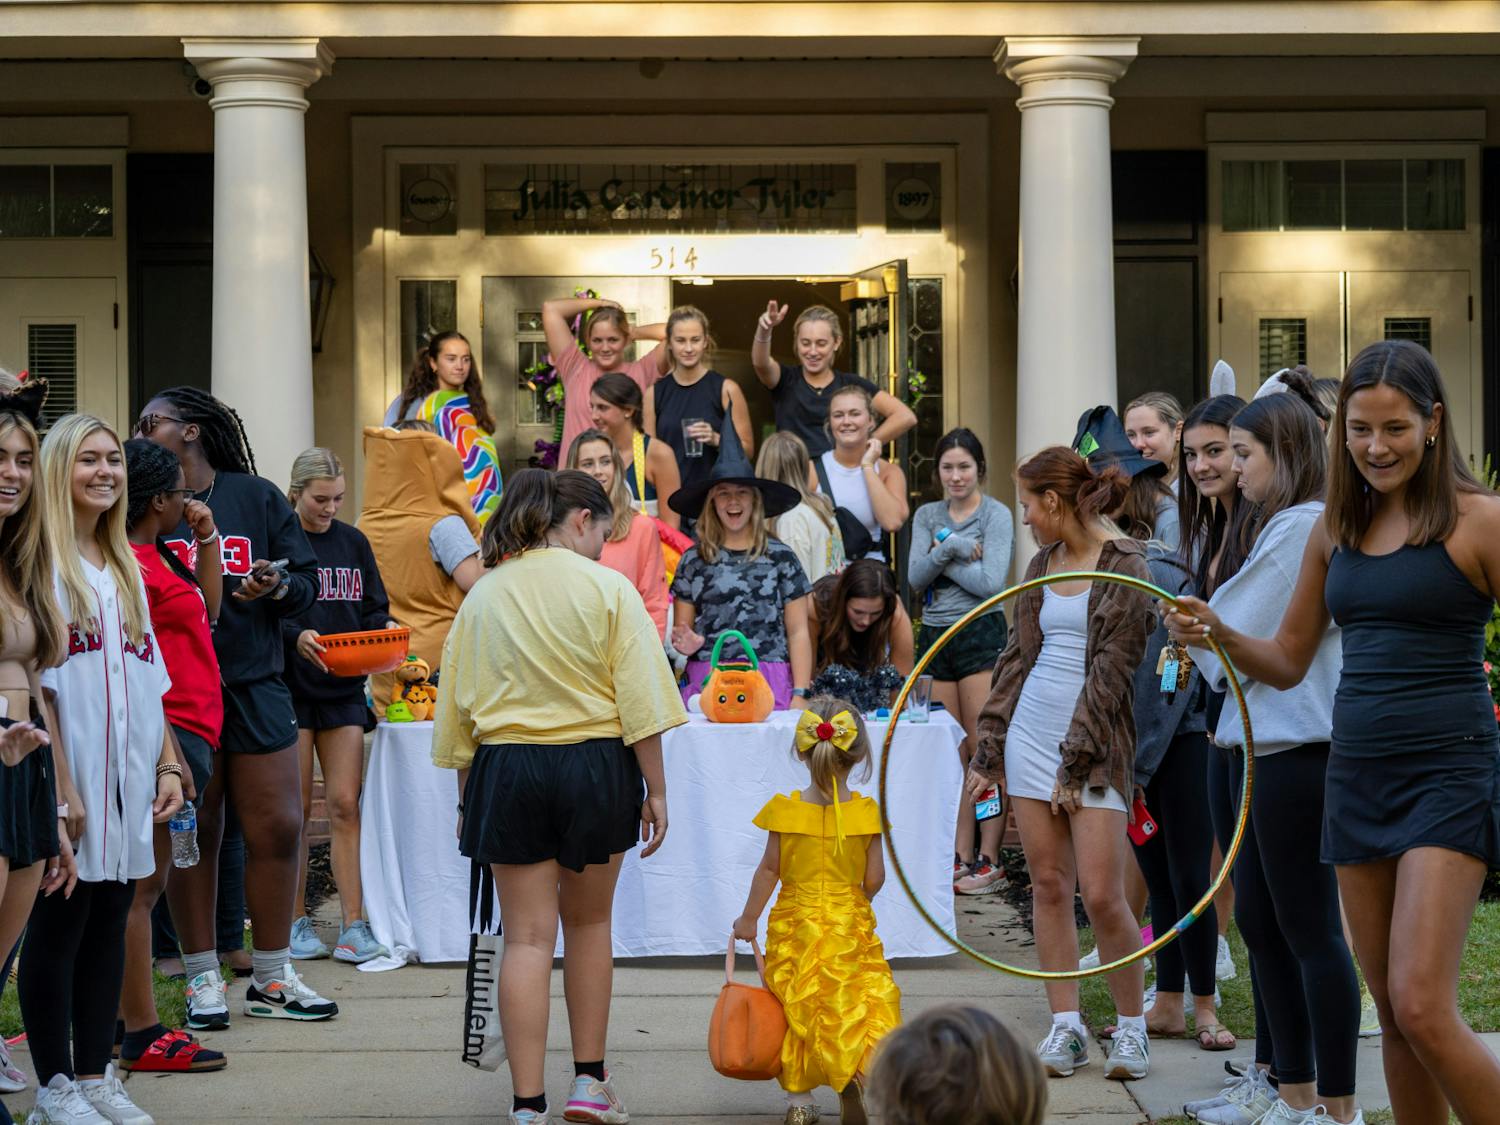 Members of a USC sorority stand outside of the sorority house entertaining costumed trick or treaters with games and toys on Oct. 25, 2022. USC Greek fraternities and sororities played games and hosted fun activities for children as they approached each candy table.